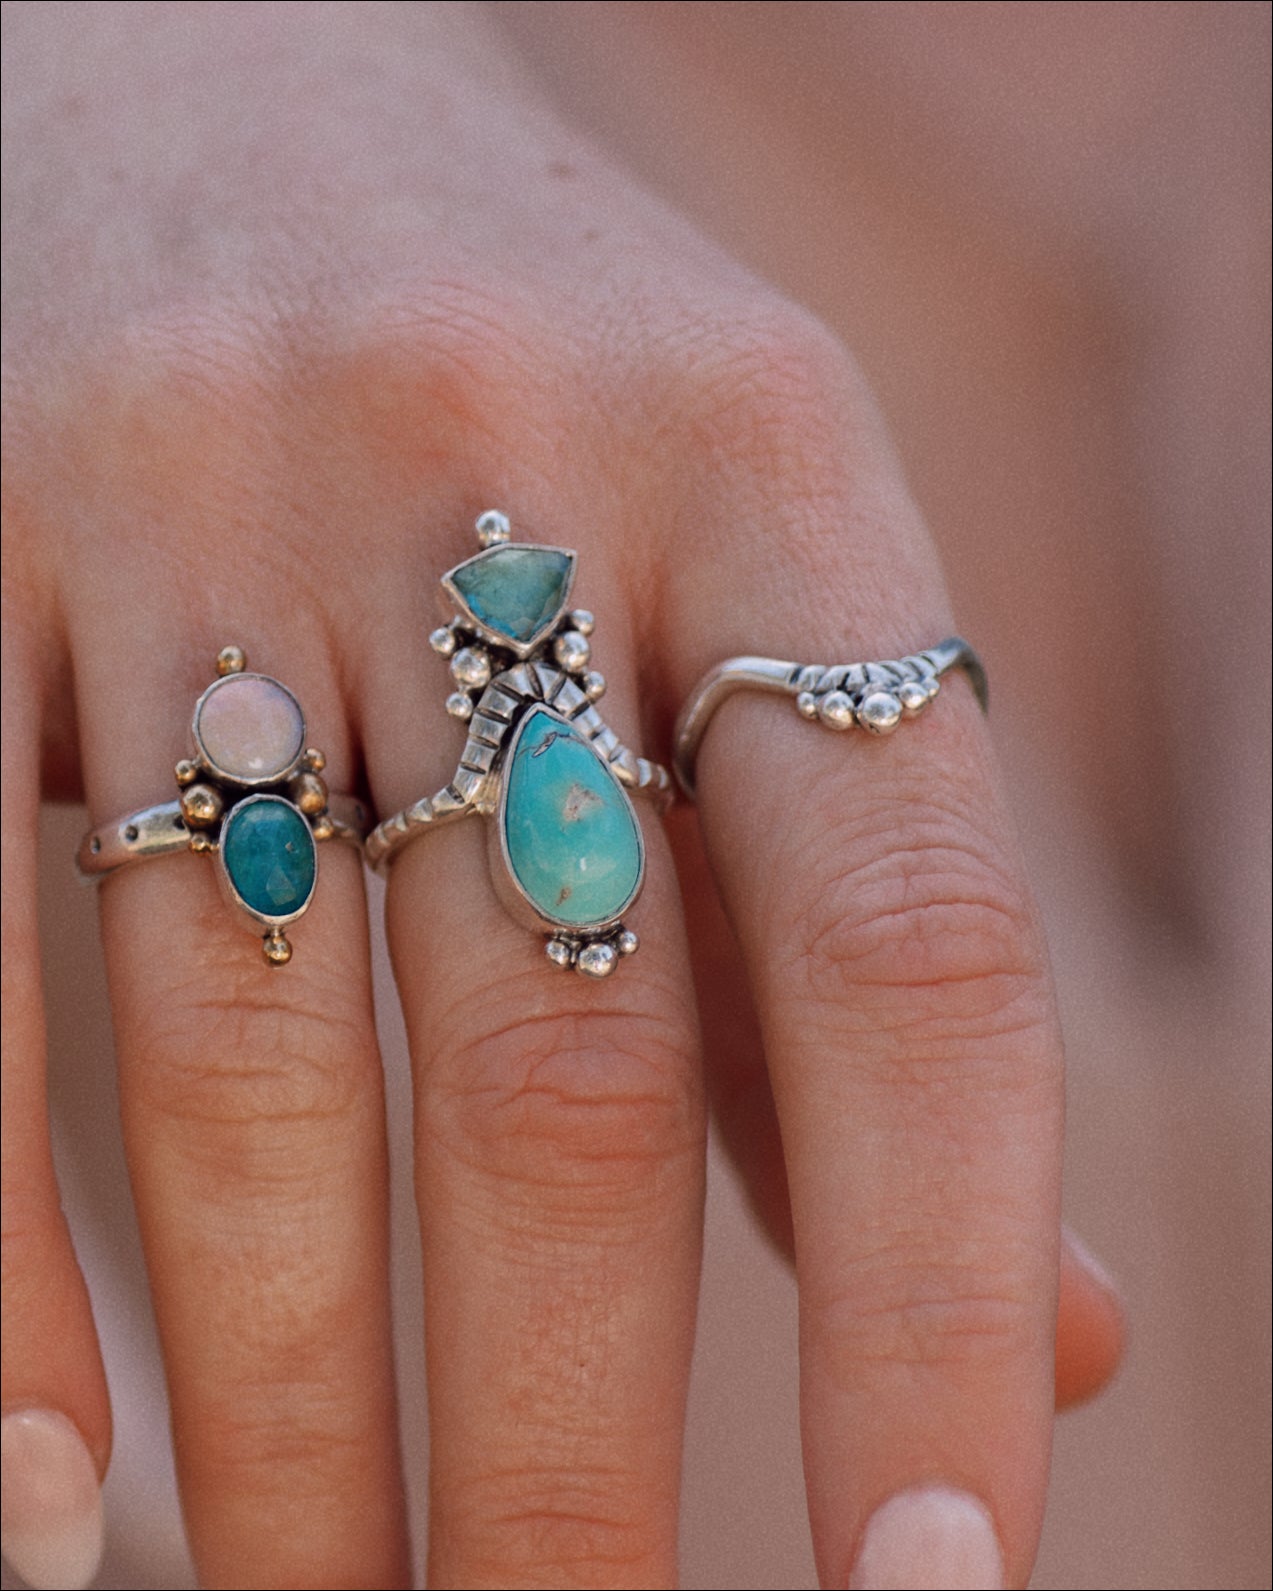 Petite Duo Ring (F) ◇ Faceted Blue Apatite + Australian Opal ◇ Size 7.5